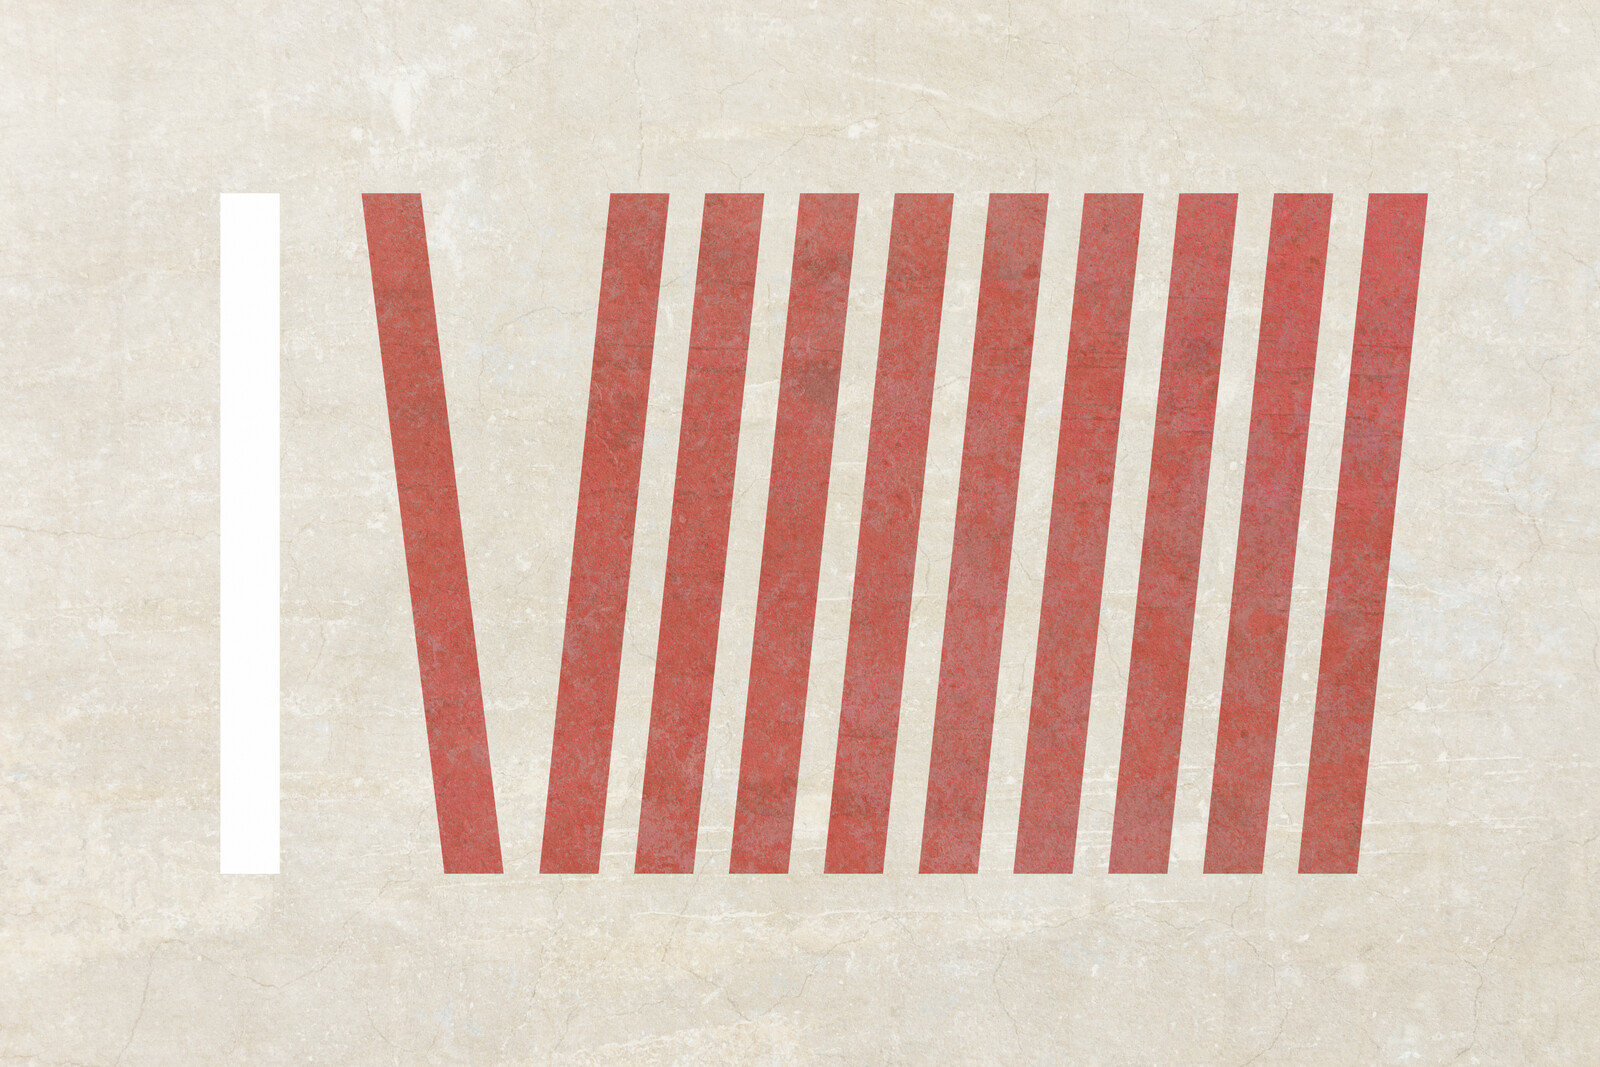 One vertical white rectangle at left, a vertical red rectangle leaning towards it, and nine vertical red rectangles leaning away.